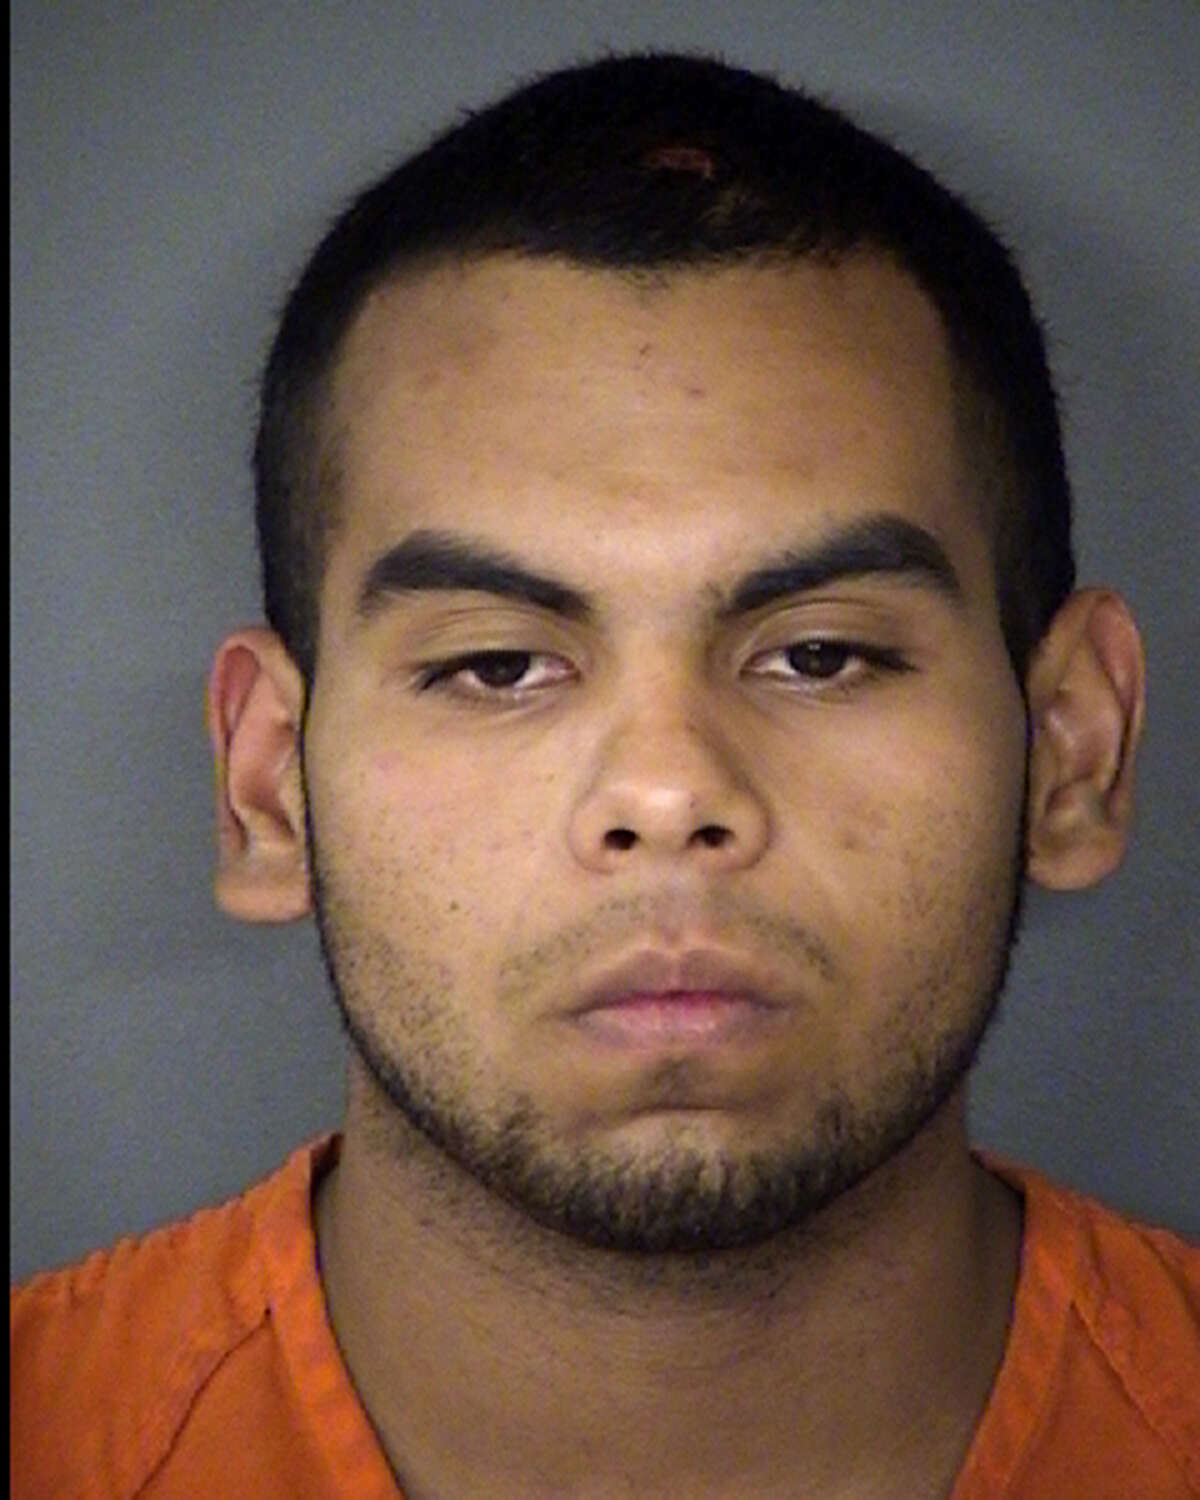 booking mug for Bryant Meza, 19, arrested on a capital murder charge yesterday related to the shooting death of his mother and father.